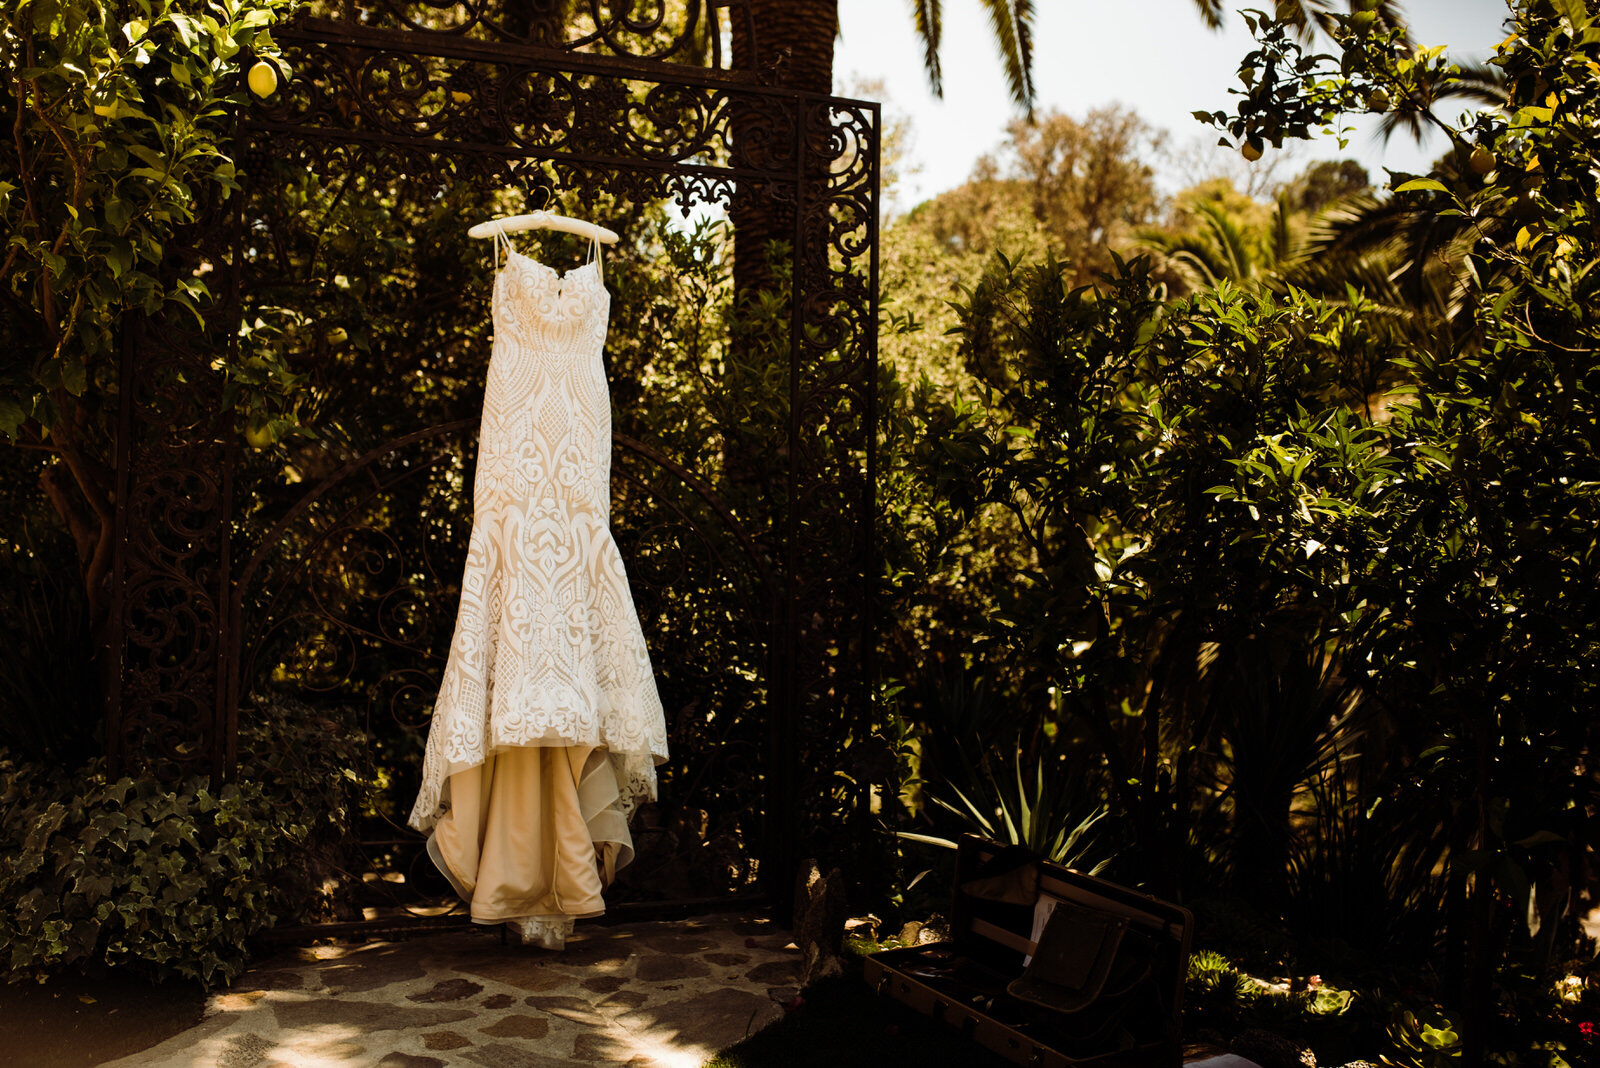 Hayley Paige Dress at the Houdini Estate Wedding Venue in Laurel Canyon, Los Angeles, California | Photo by Kept Record | www.keptrecord.com